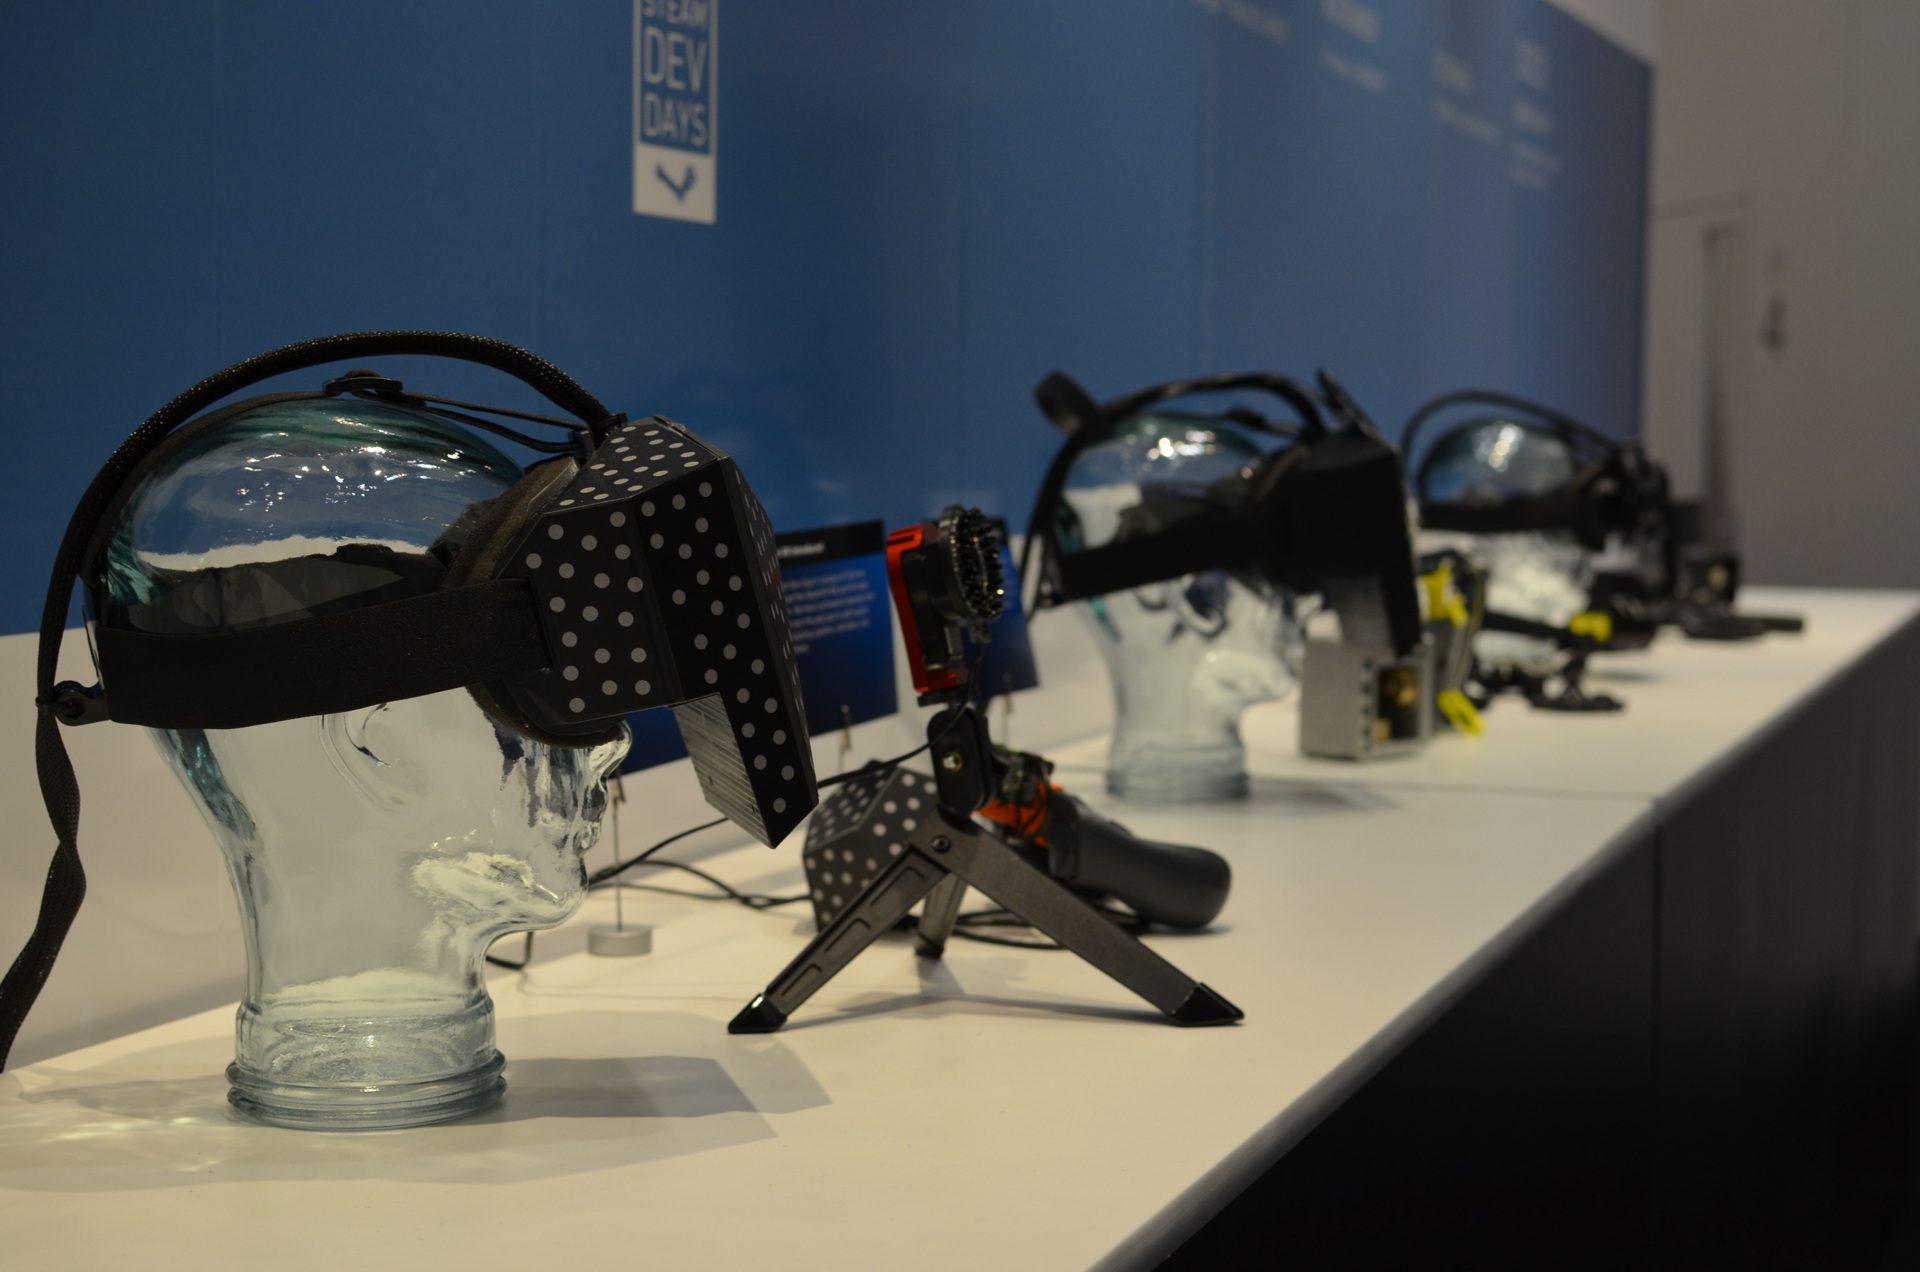 Valve Reveals of Vive Prototypes, We Chart For You – Road to VR